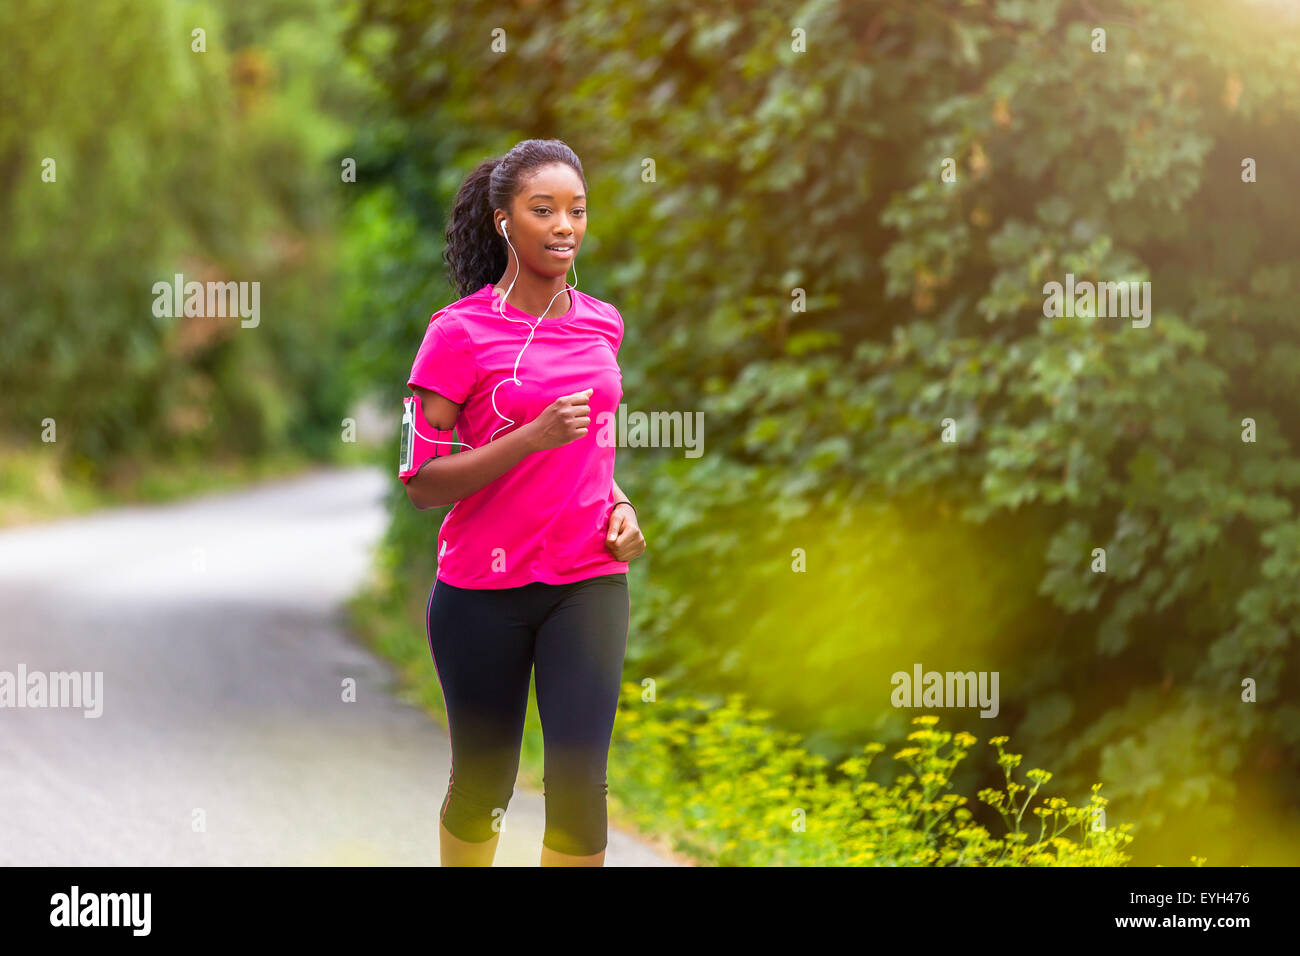 African American Woman Runner Jogging Outdoors Stock Photo 304509992